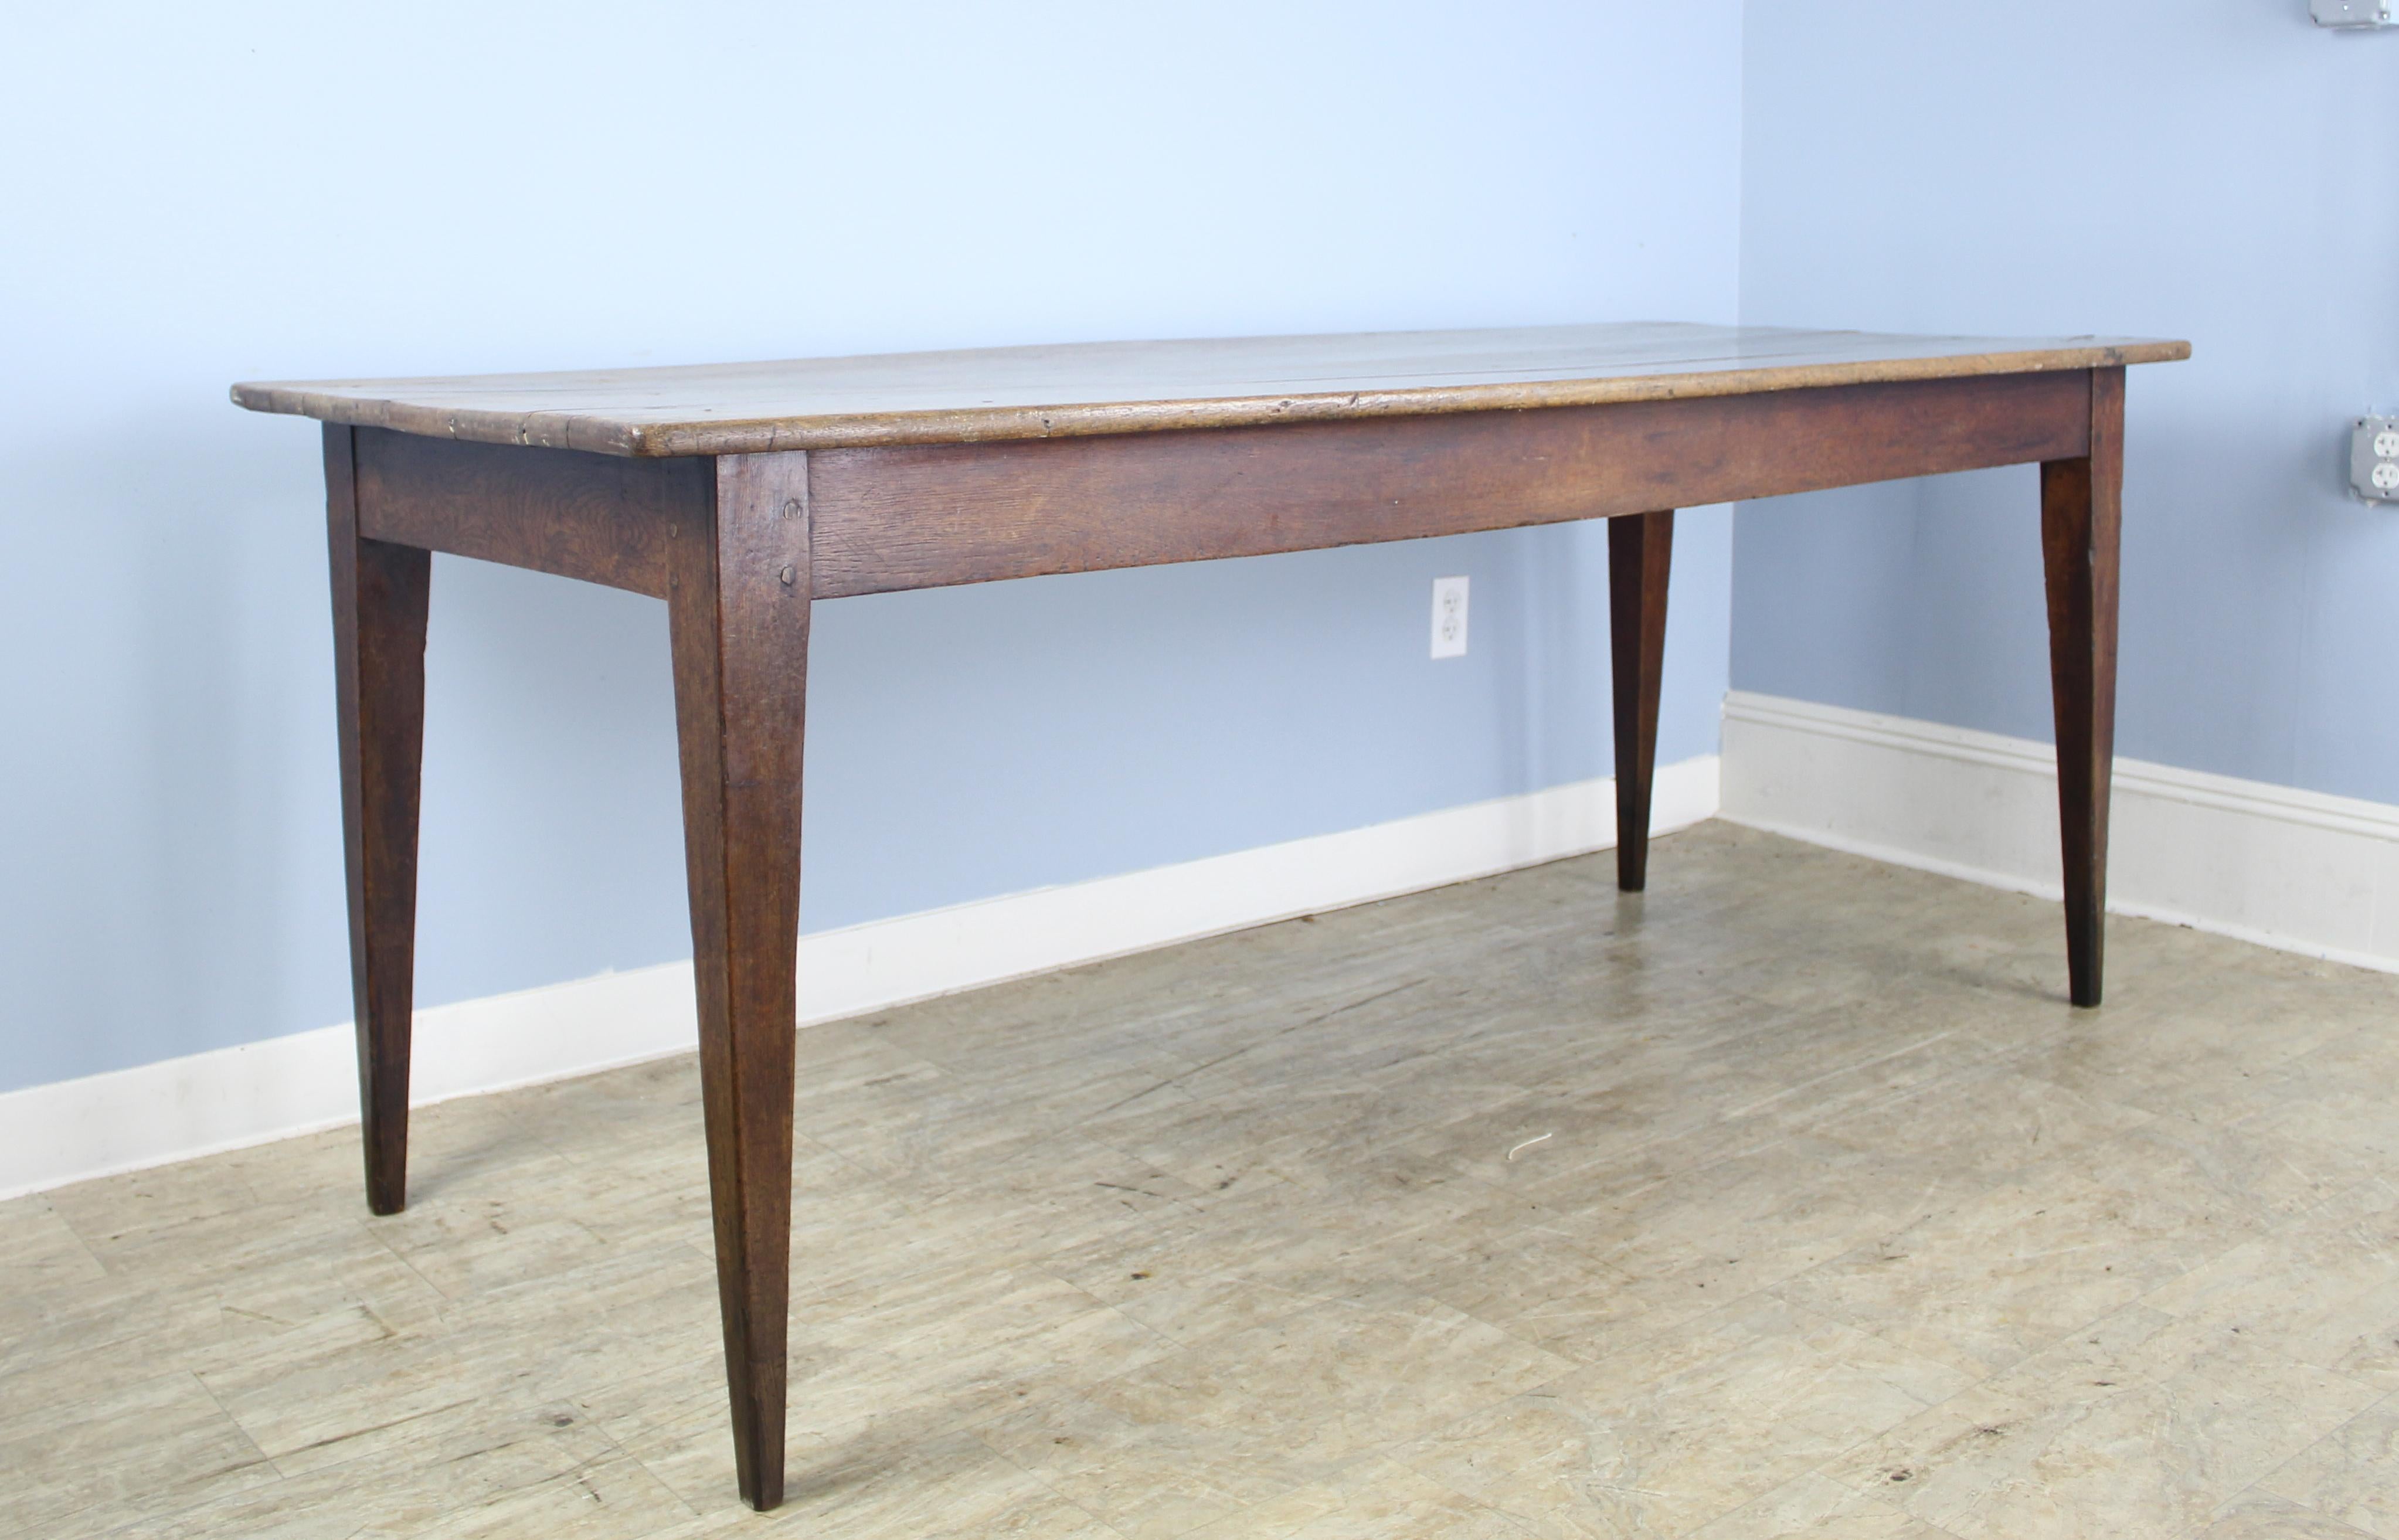 A classic farm table in mildly distressed faded oak, very well patinated. The tapered legs are nicely pegged at the apron. 26 inch apron height is excellent for knees, and there are 71 inches between the legs on the long side.